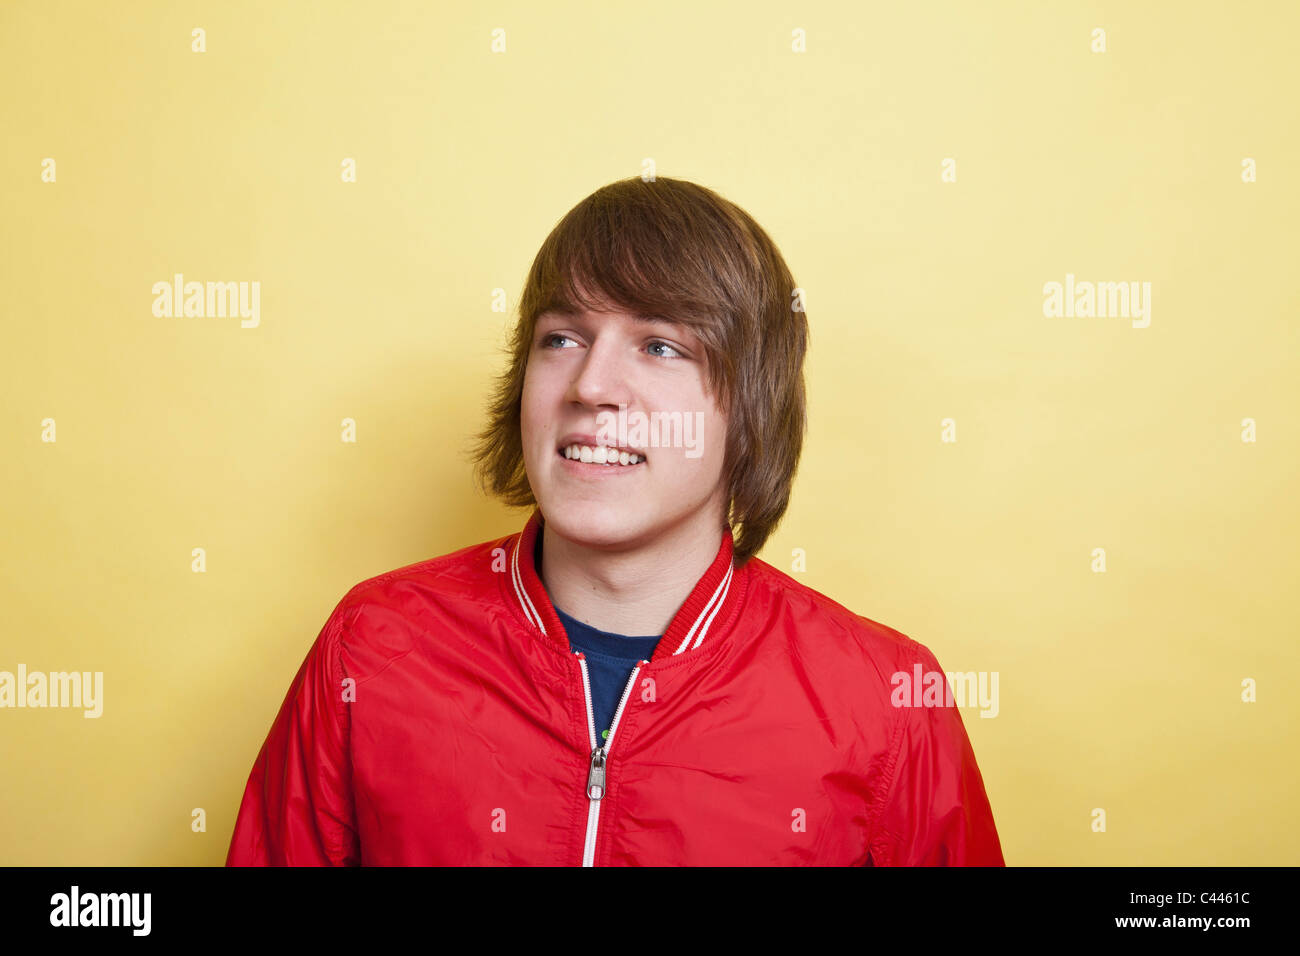 A teenage boy looking off to the side and laughing, portrait, studio shot Stock Photo